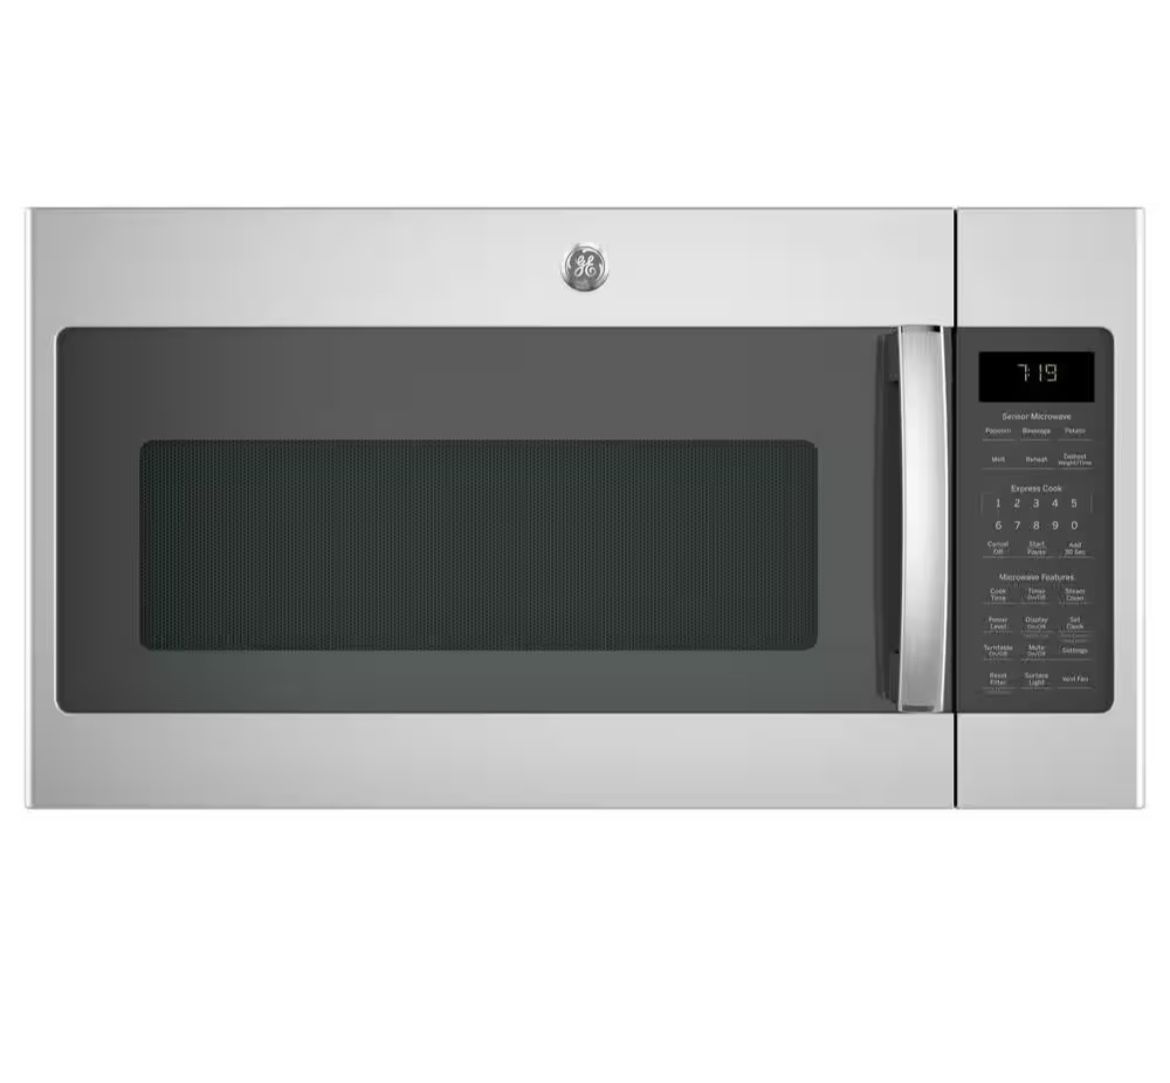 GE 1.9 cu. ft. Over the Range Microwave in Stainless Steel with Sensor Cooking JNM7195SKSS